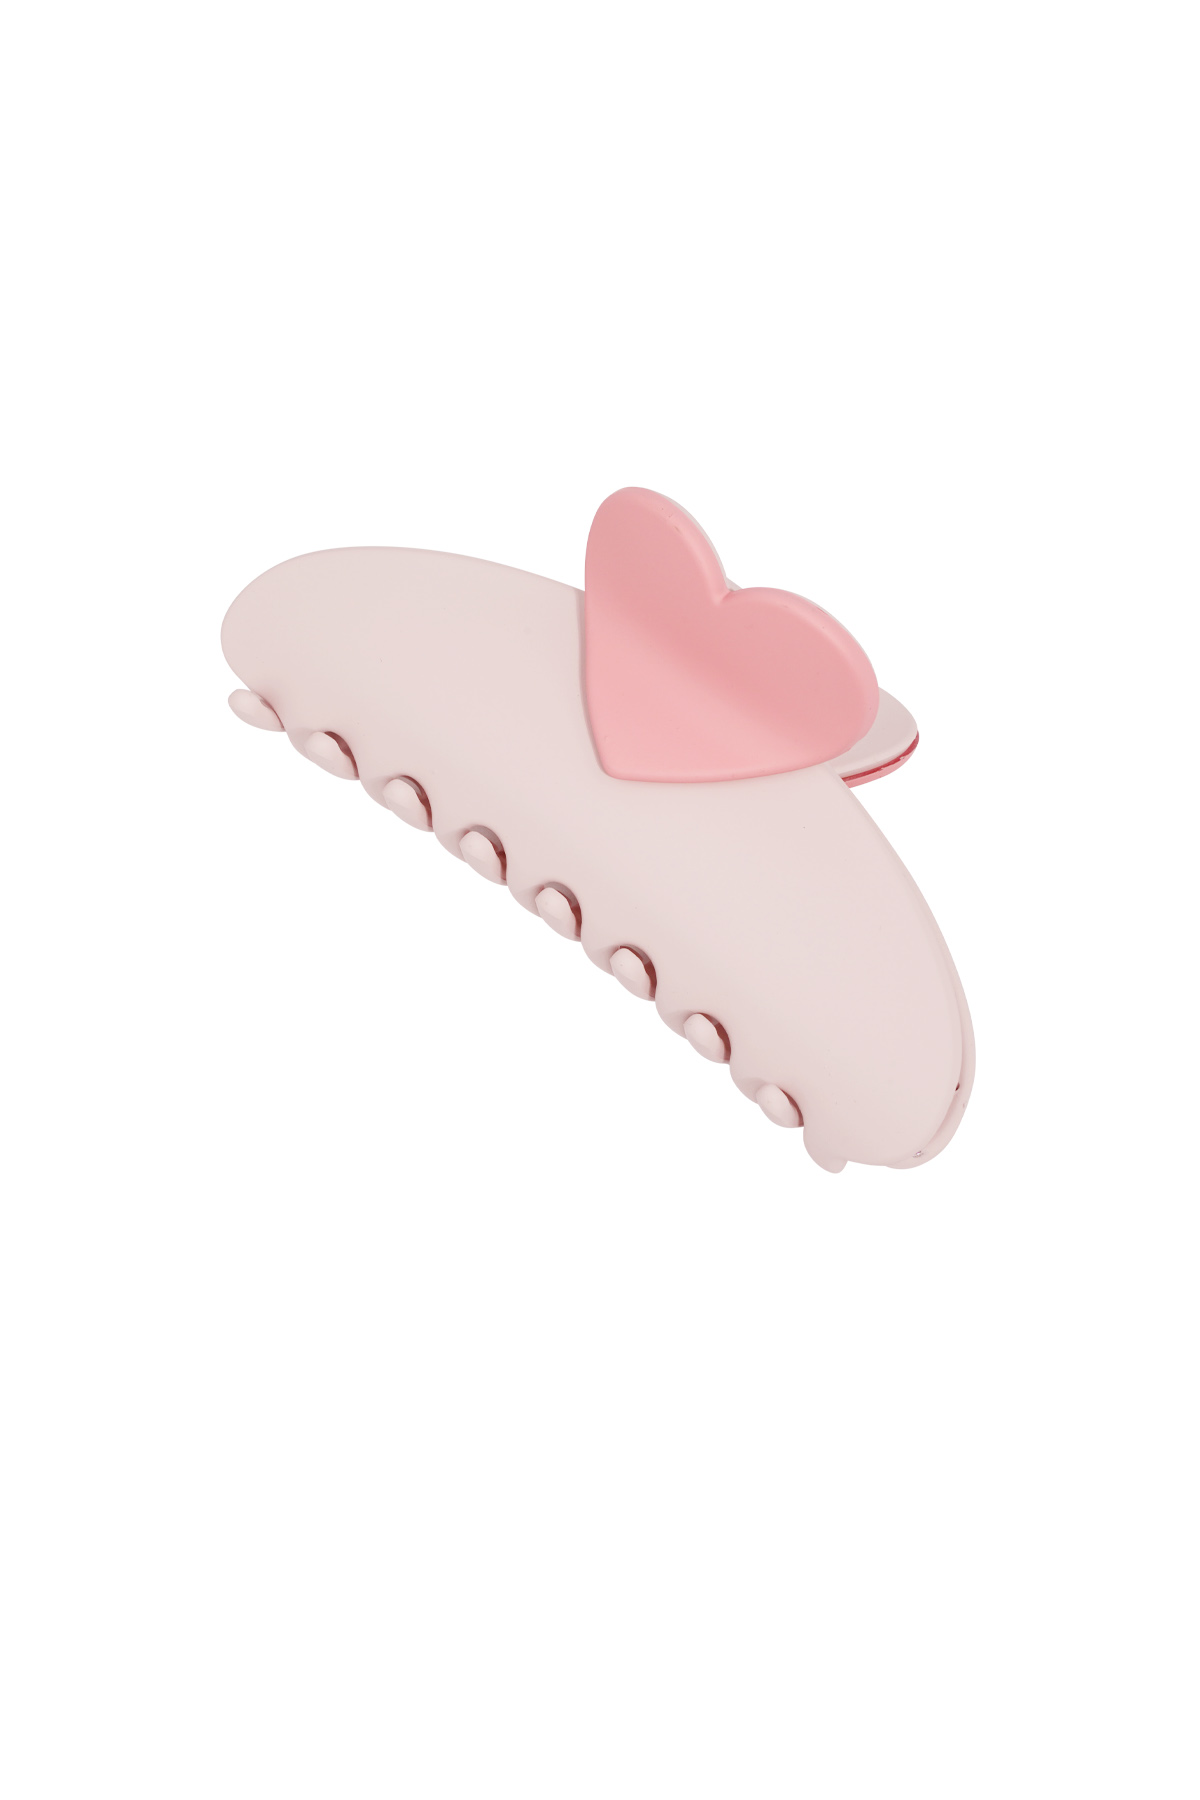 hair clip with heart detail - pink h5 